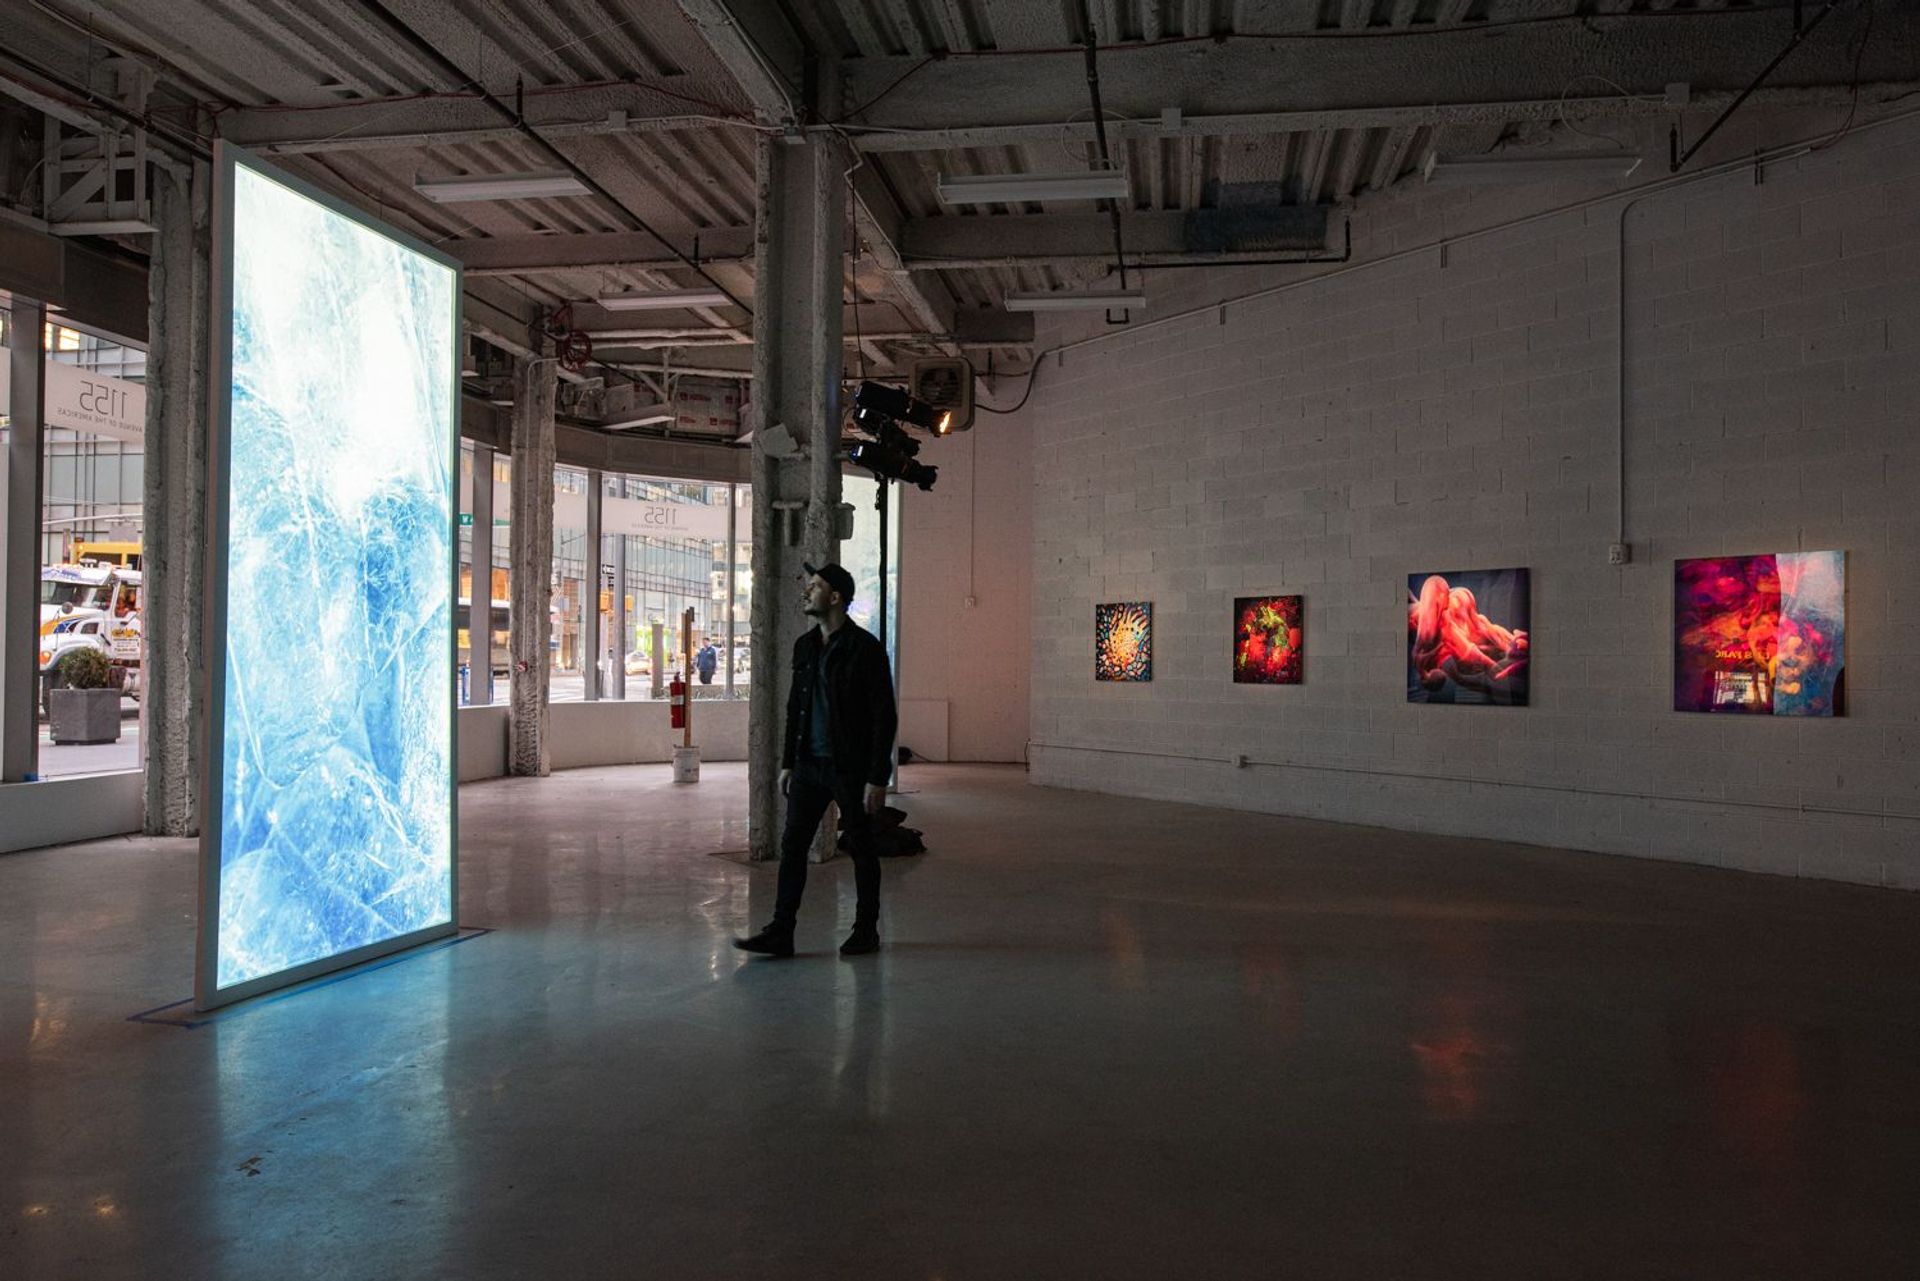 An installation view of Alex Nero's show The Weather Within near Bryant Park Image courtesy of EcoArt Project